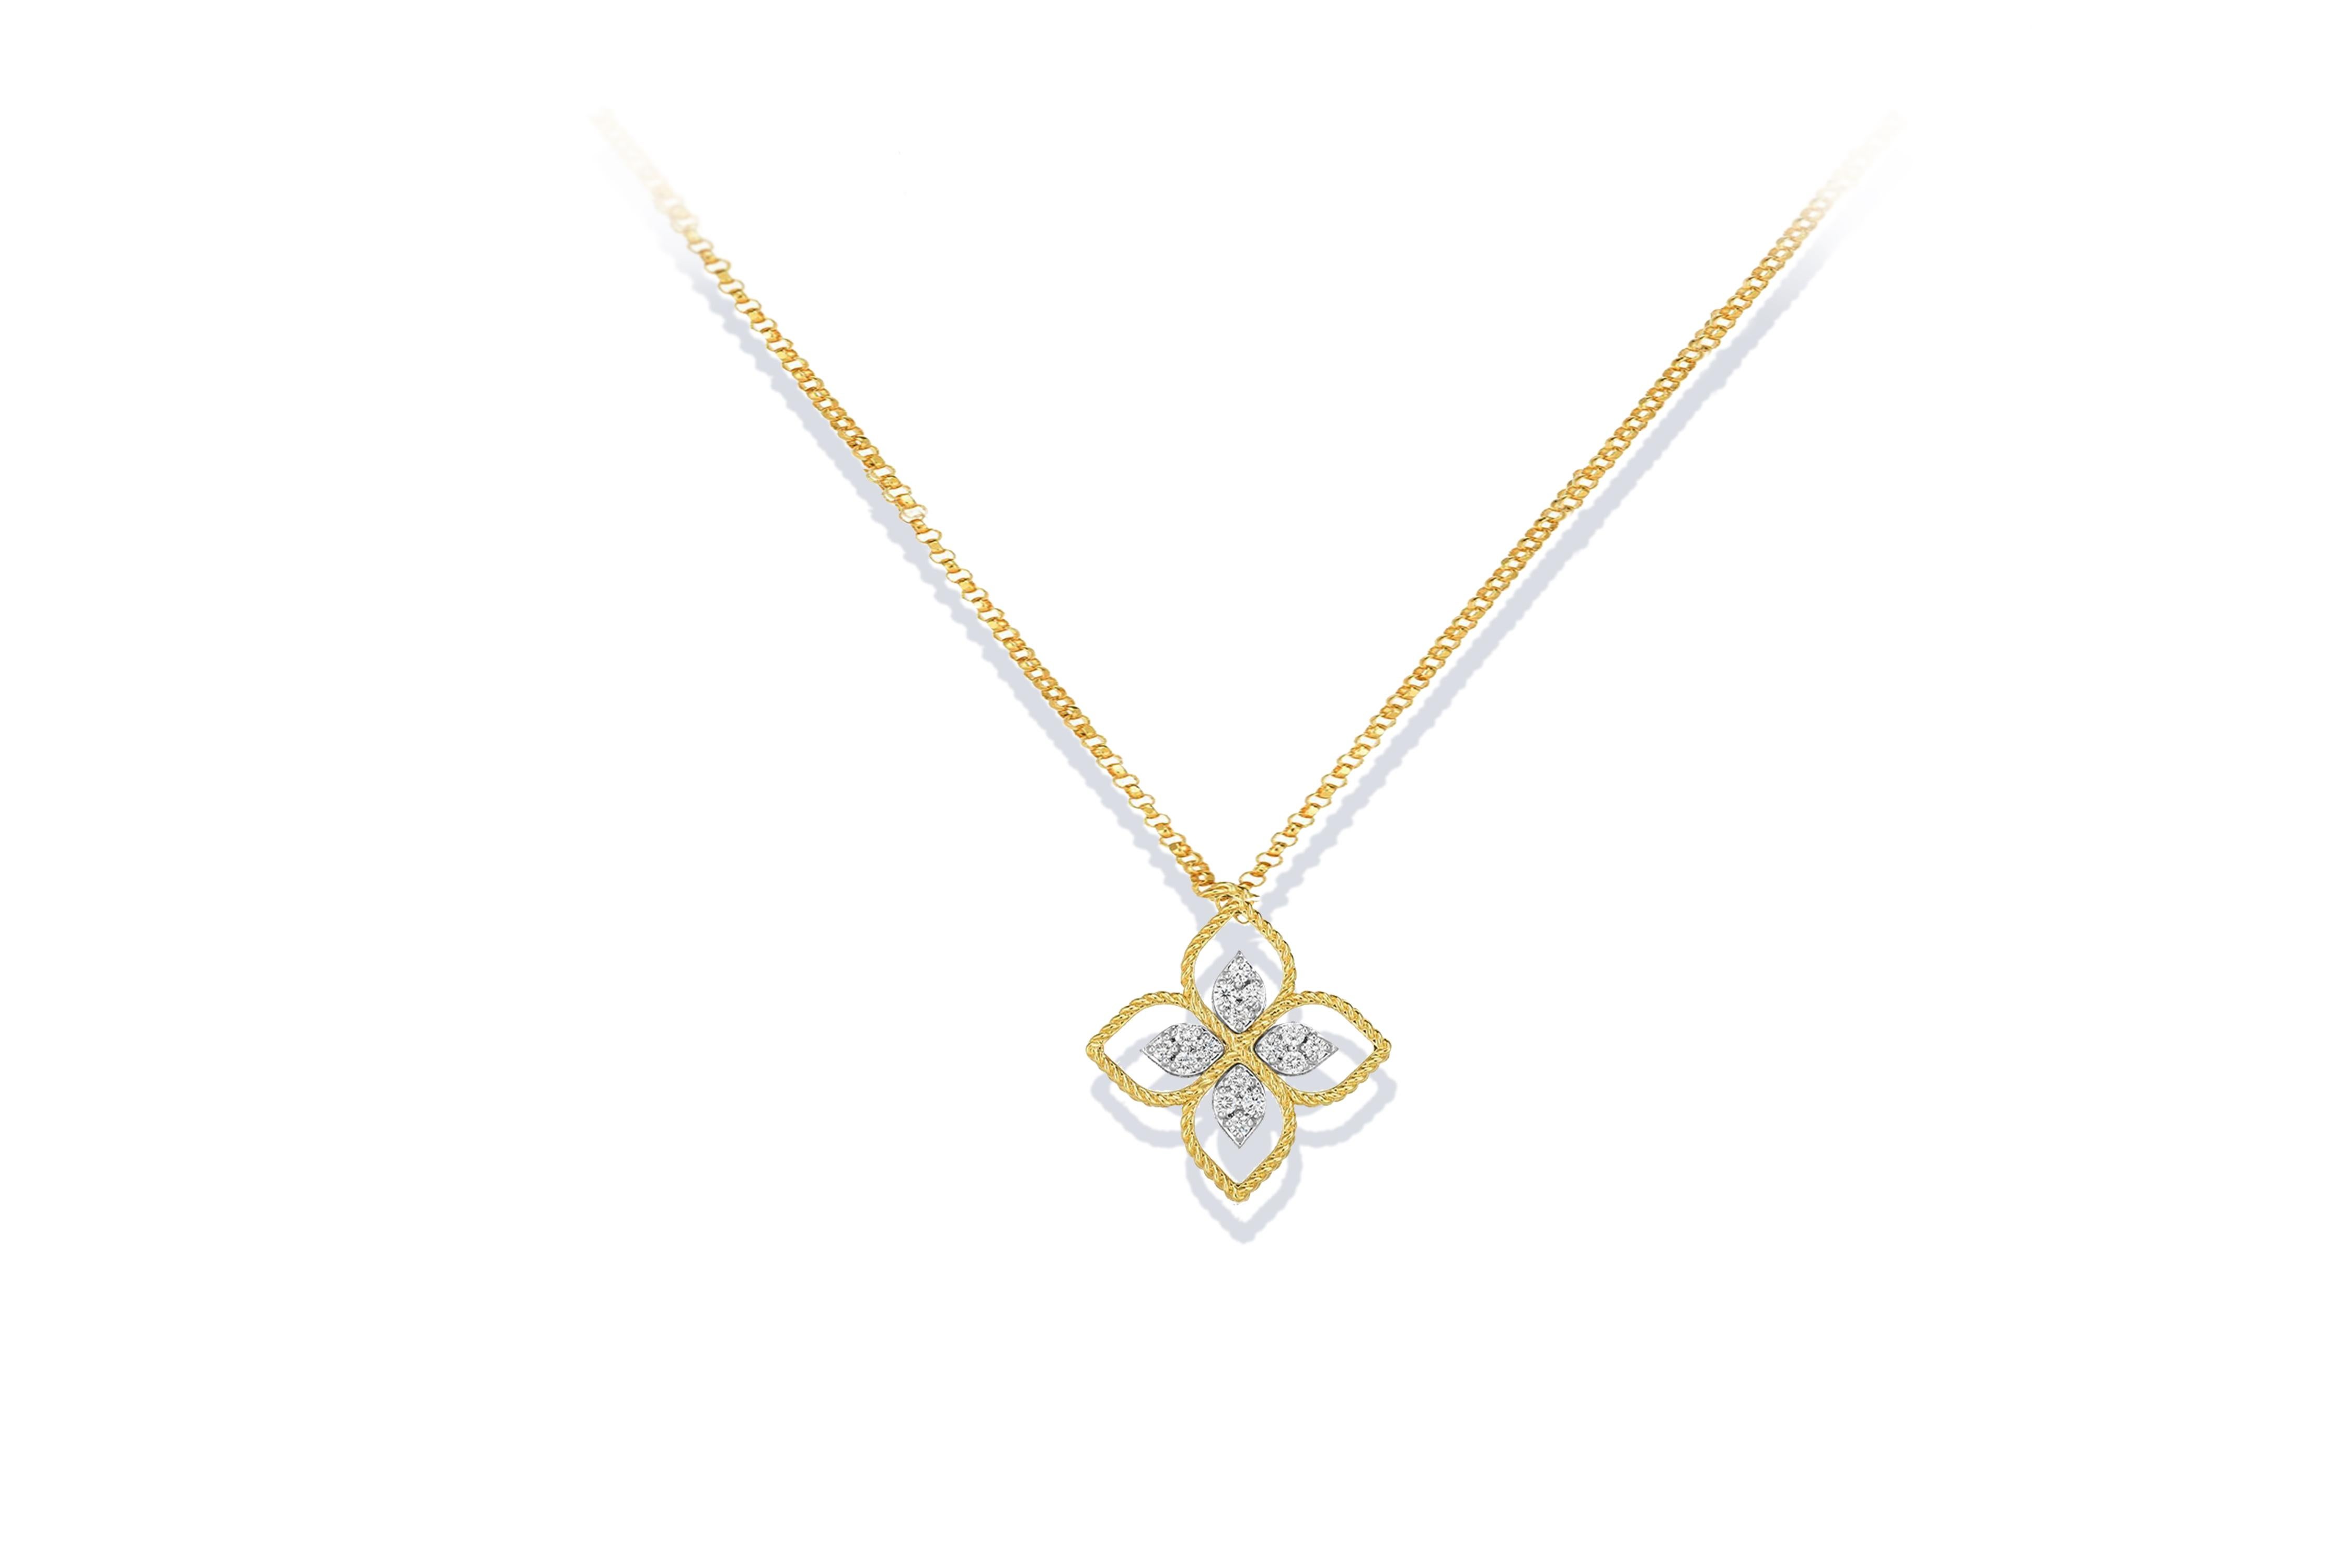 From Roberto Coin, this alluring 18k yellow gold pendant is perfect by itself, but it has so much more of an impact when worn with other Roberto Coin pieces! In Roberto Coin's Princess Flower. 
SPECIFICATIONS
Chain Length: 17 in
Metal: 18k Yellow